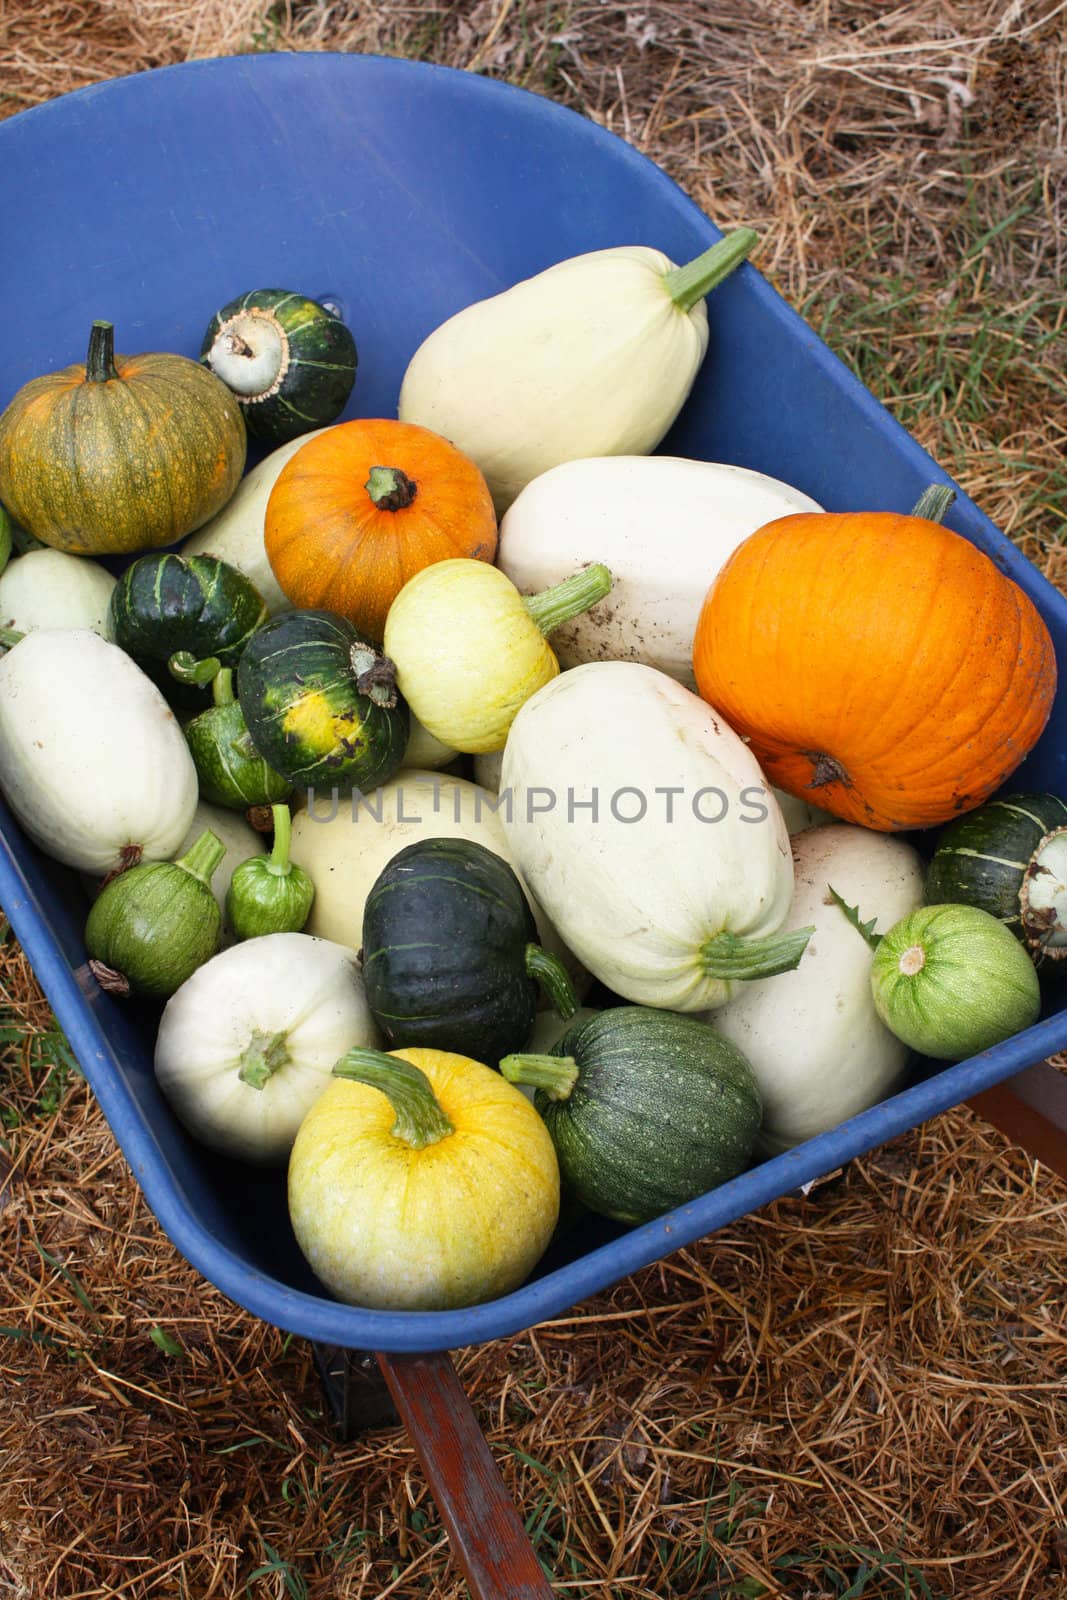 An image of a variety of organic heirloom winter squashes, including pumpkins, in a blue wheelbarrow.